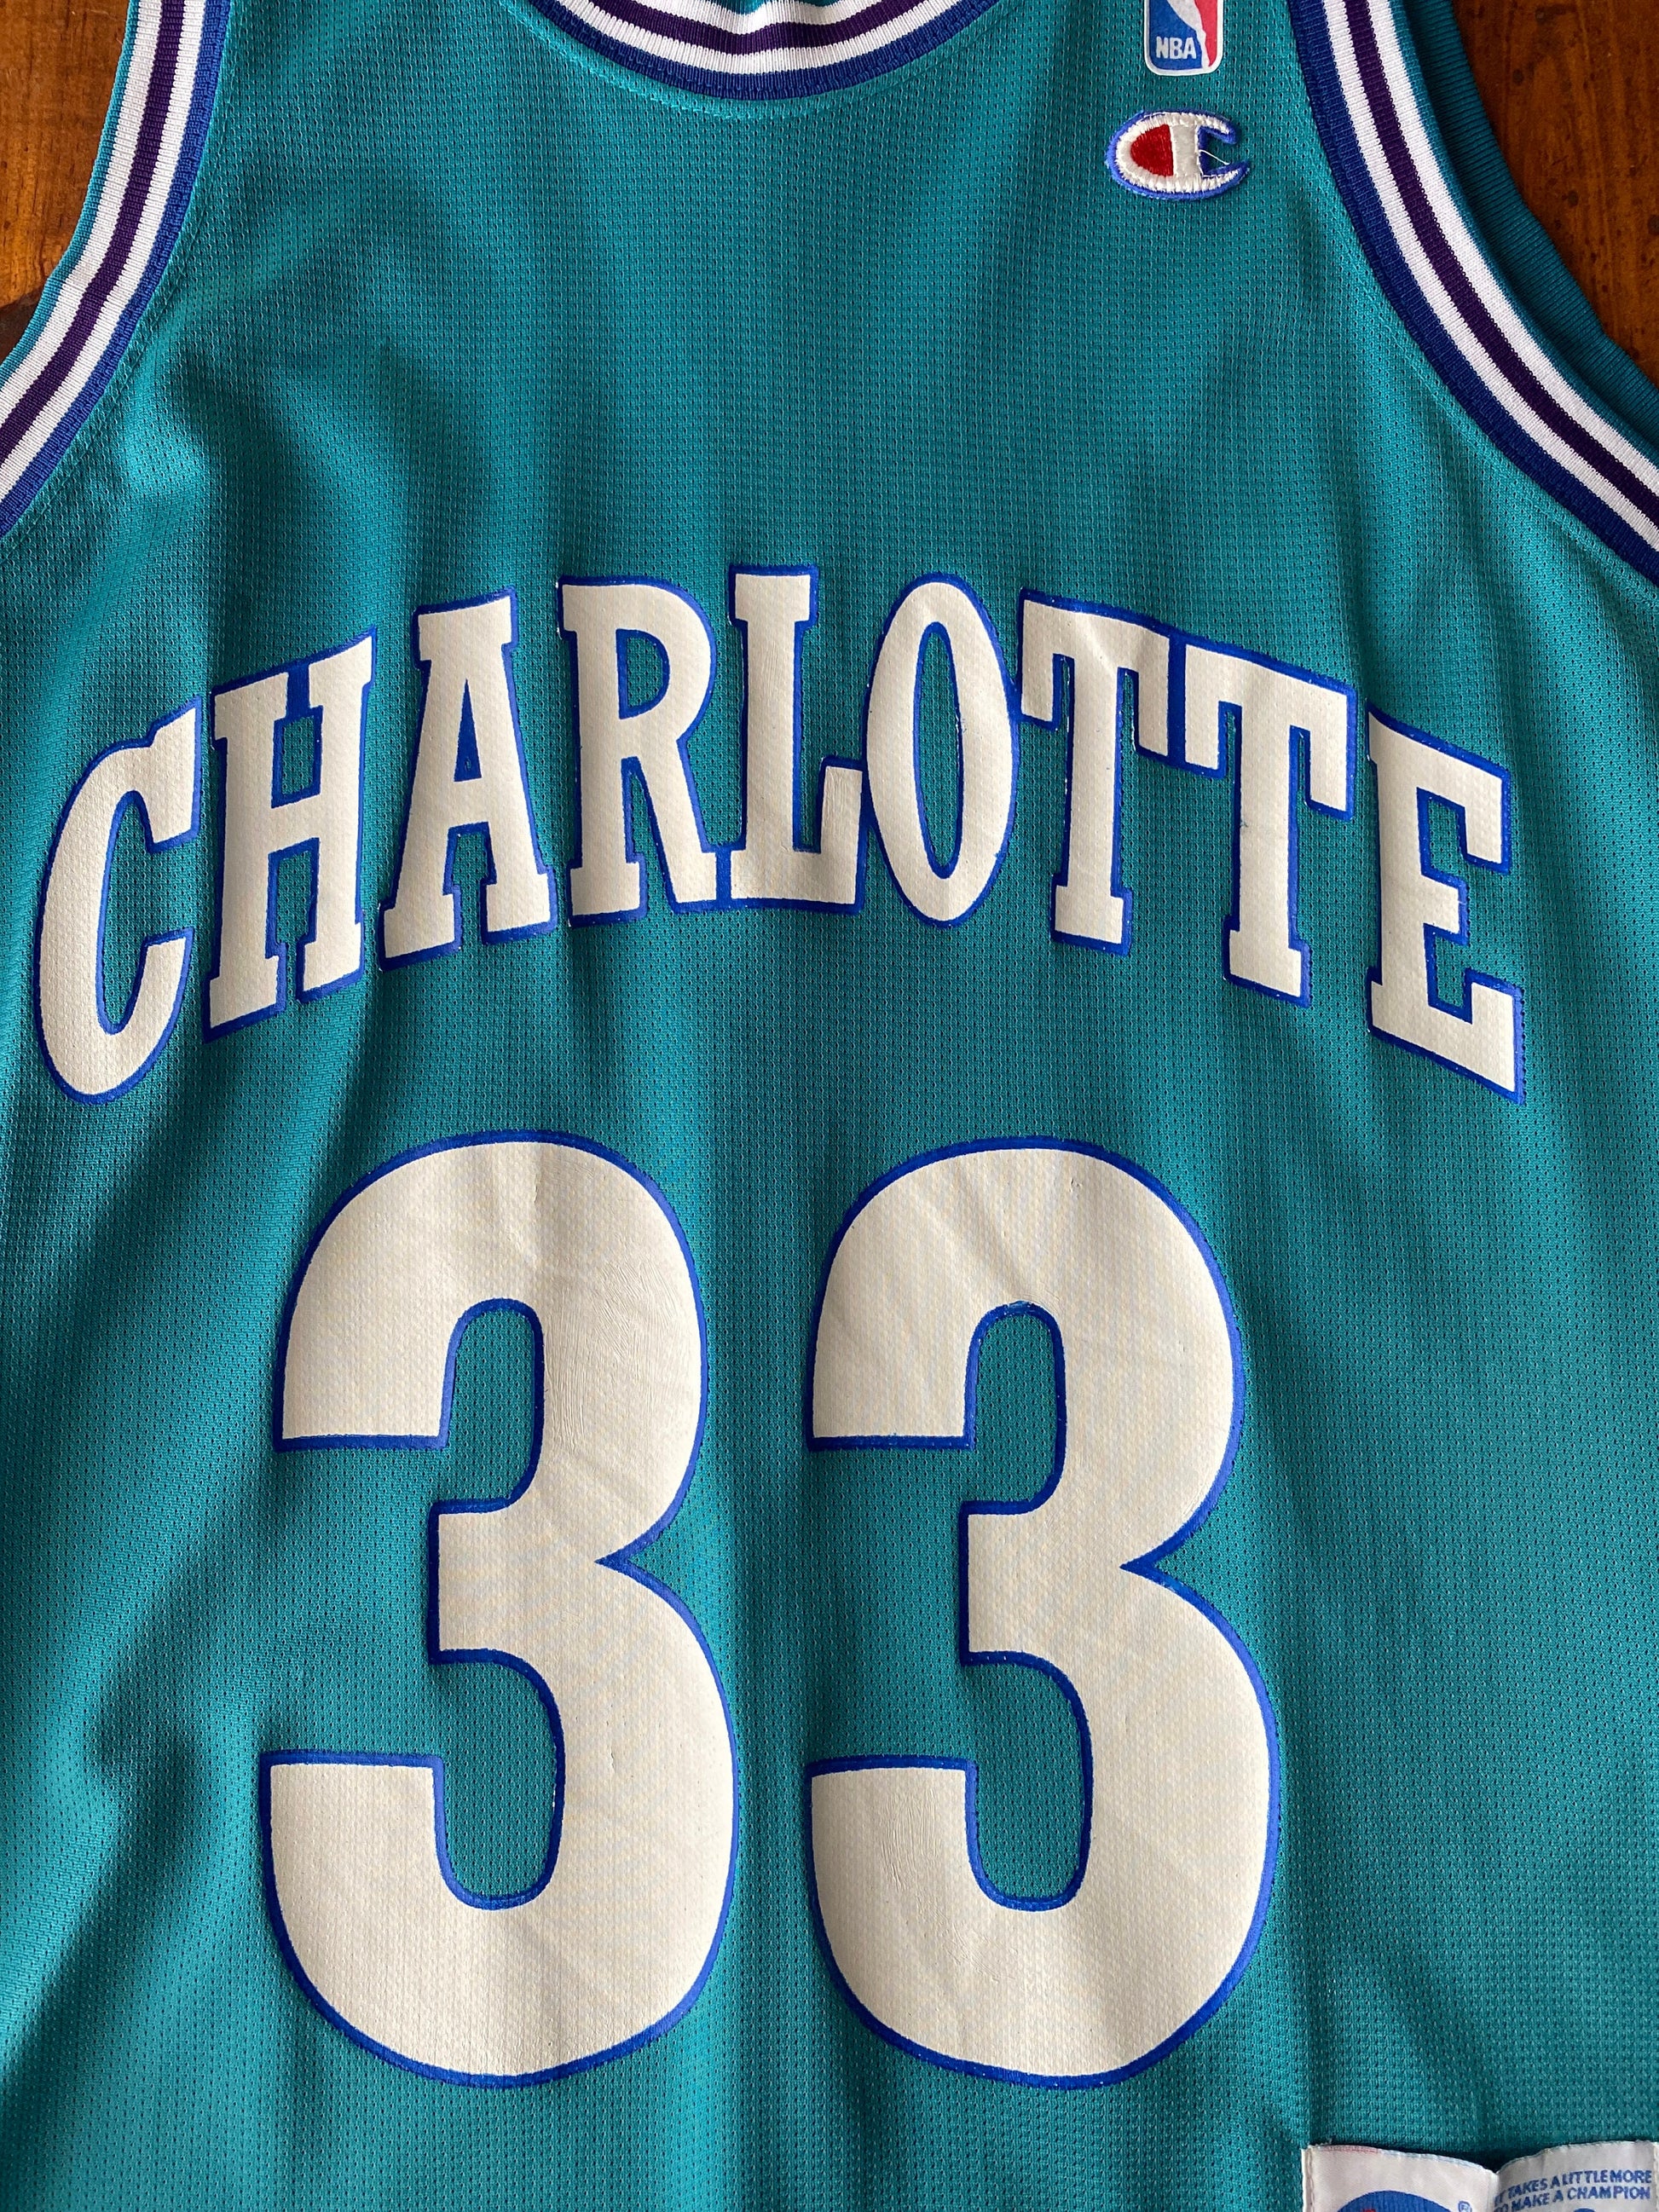 Vintage 90s NBA Champion Mourning #33 Jersey Charlotte Hornets - Size 36, Made in USA